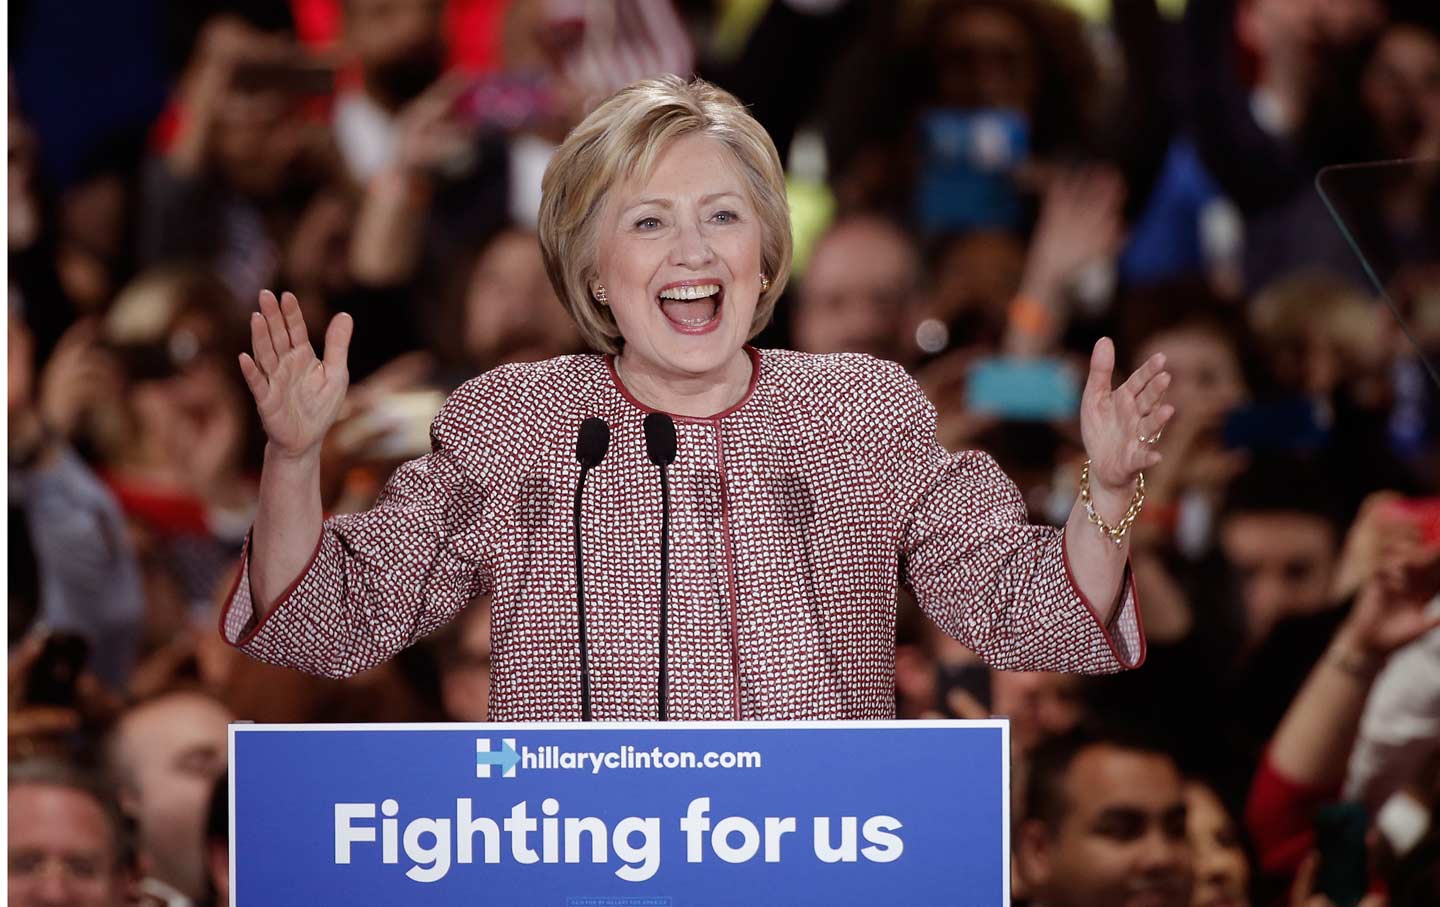 Hillary Clinton S Win In New York Raises Tough Questions For Bernie Sanders And His Supporters